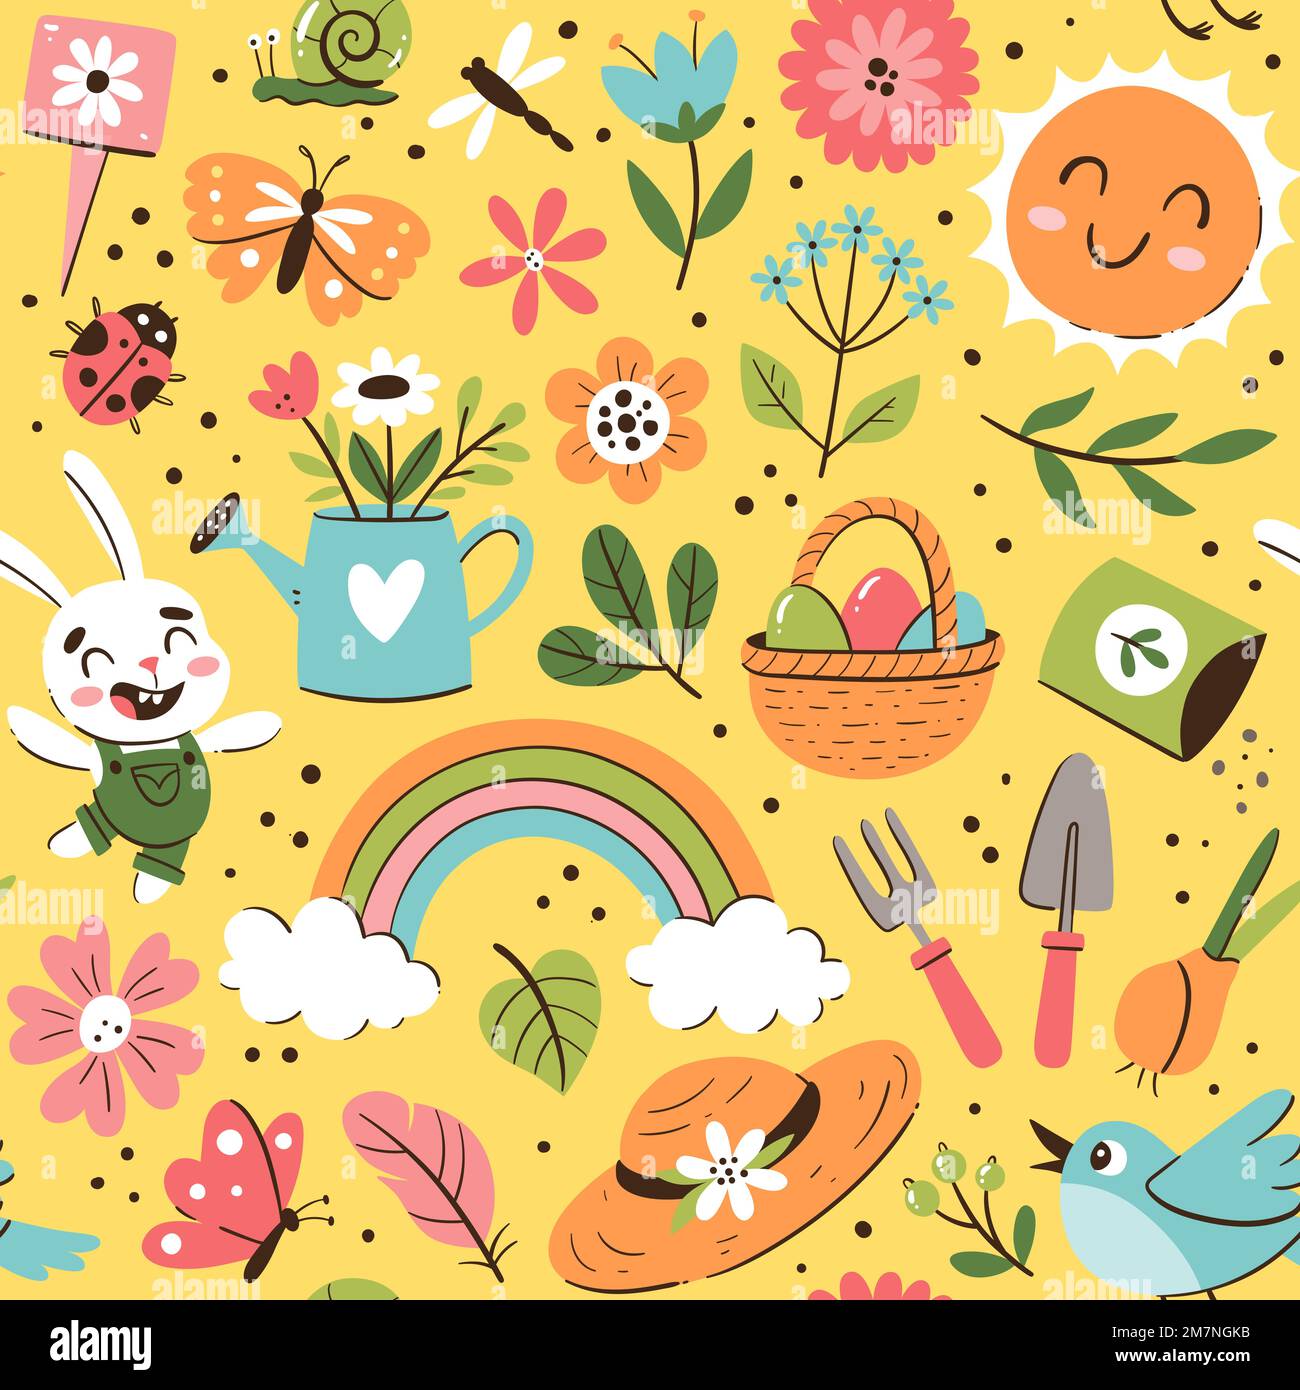 Hand drawn spring seamless pattern with seasonal elements. Flowers, plants and gardening tools. Colorful vector illustration with isolated elements. Stock Vector